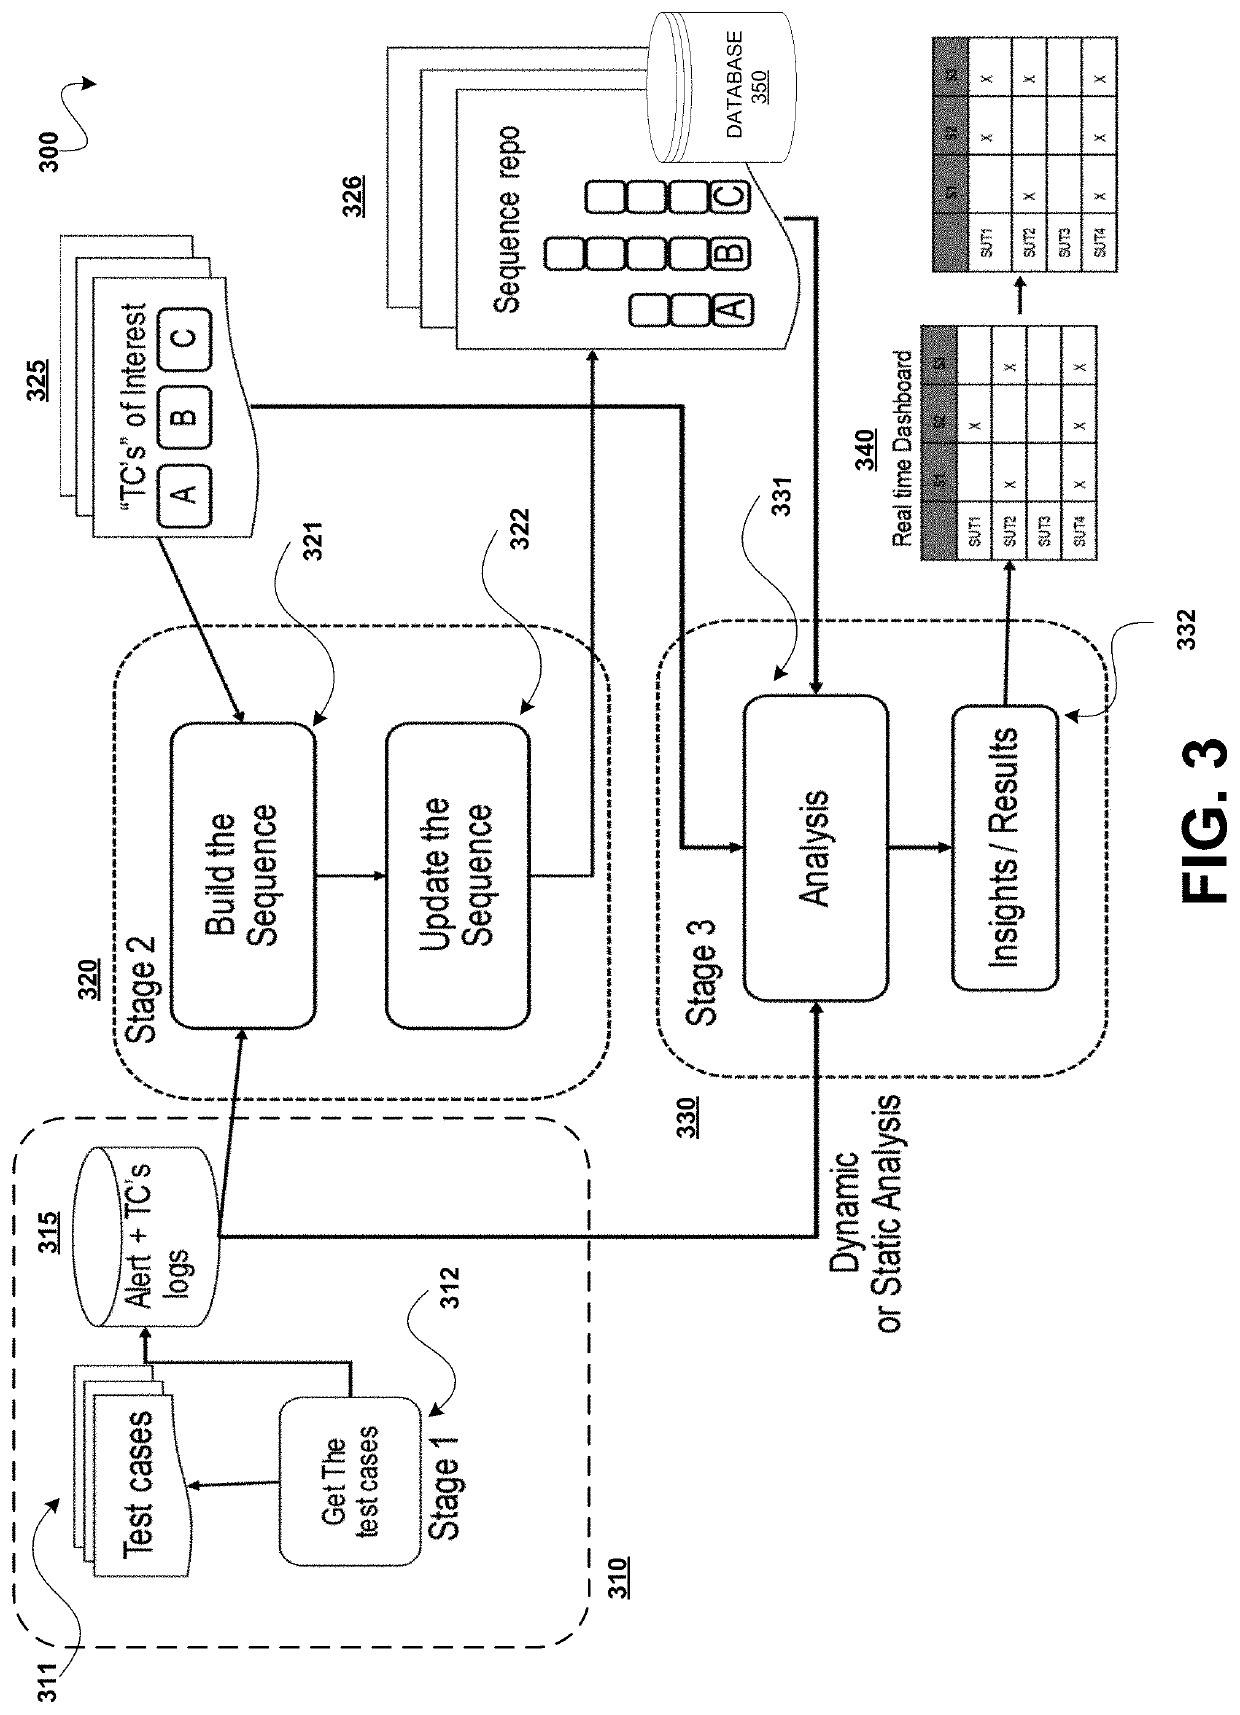 System and methods for amalgamation of artificial intelligence (AI) and machine learning (ML) in test creation, execution, and prediction